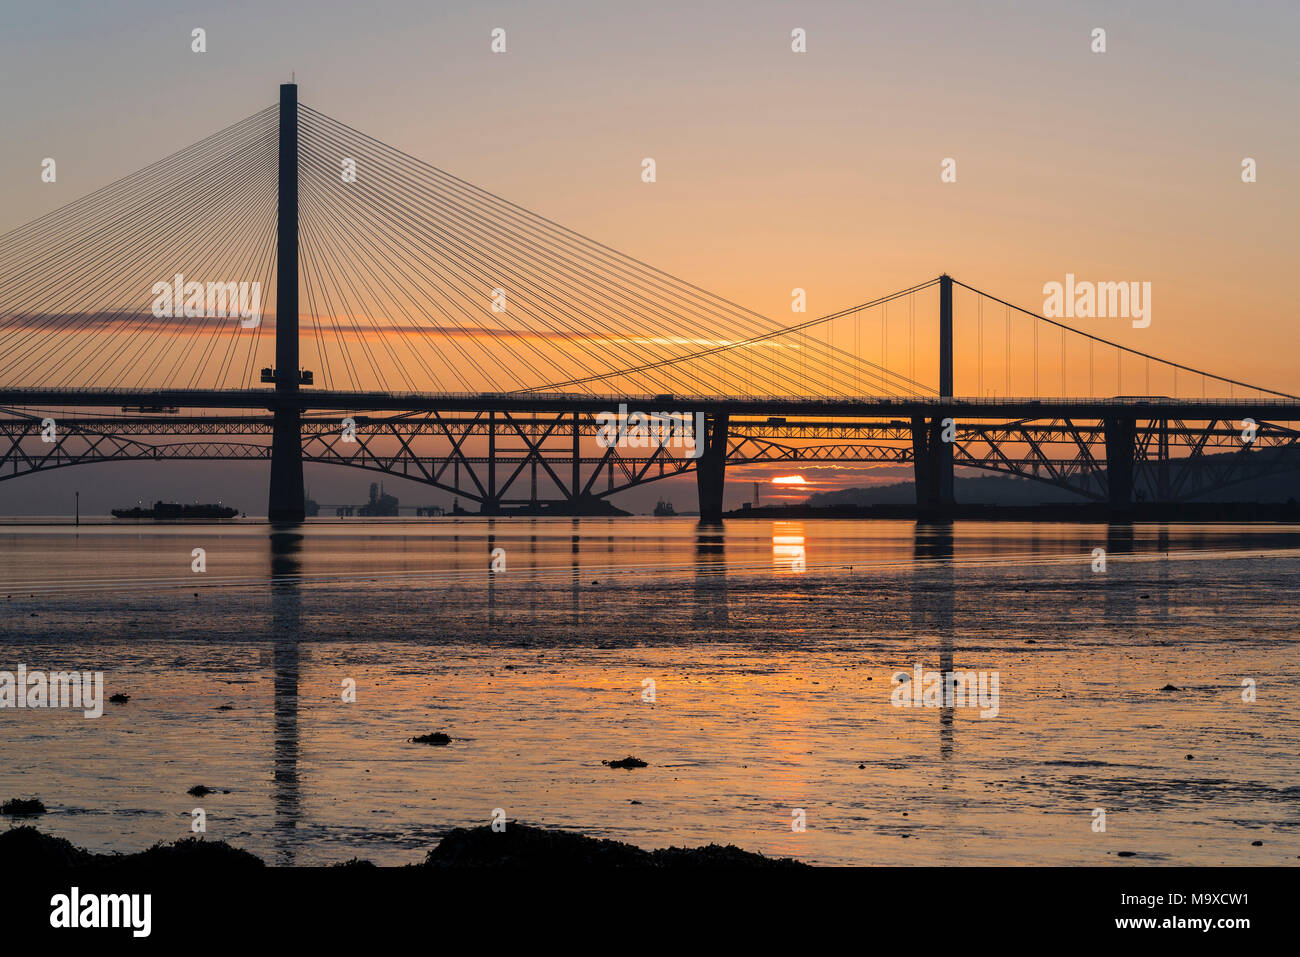 South Queensferry, Scotland, UK. 29th March, 2018. UK Weather: Beautiful sunrise on a clear cold morning behind the three famous bridges crossing the Firth of Forth at South Queensferry. The three bridges are the new Queensferry Crossing, Forth Road Bridge and the iconic Forth (rail) Bridge. Credit: Iain Masterton/Alamy Live News Stock Photo